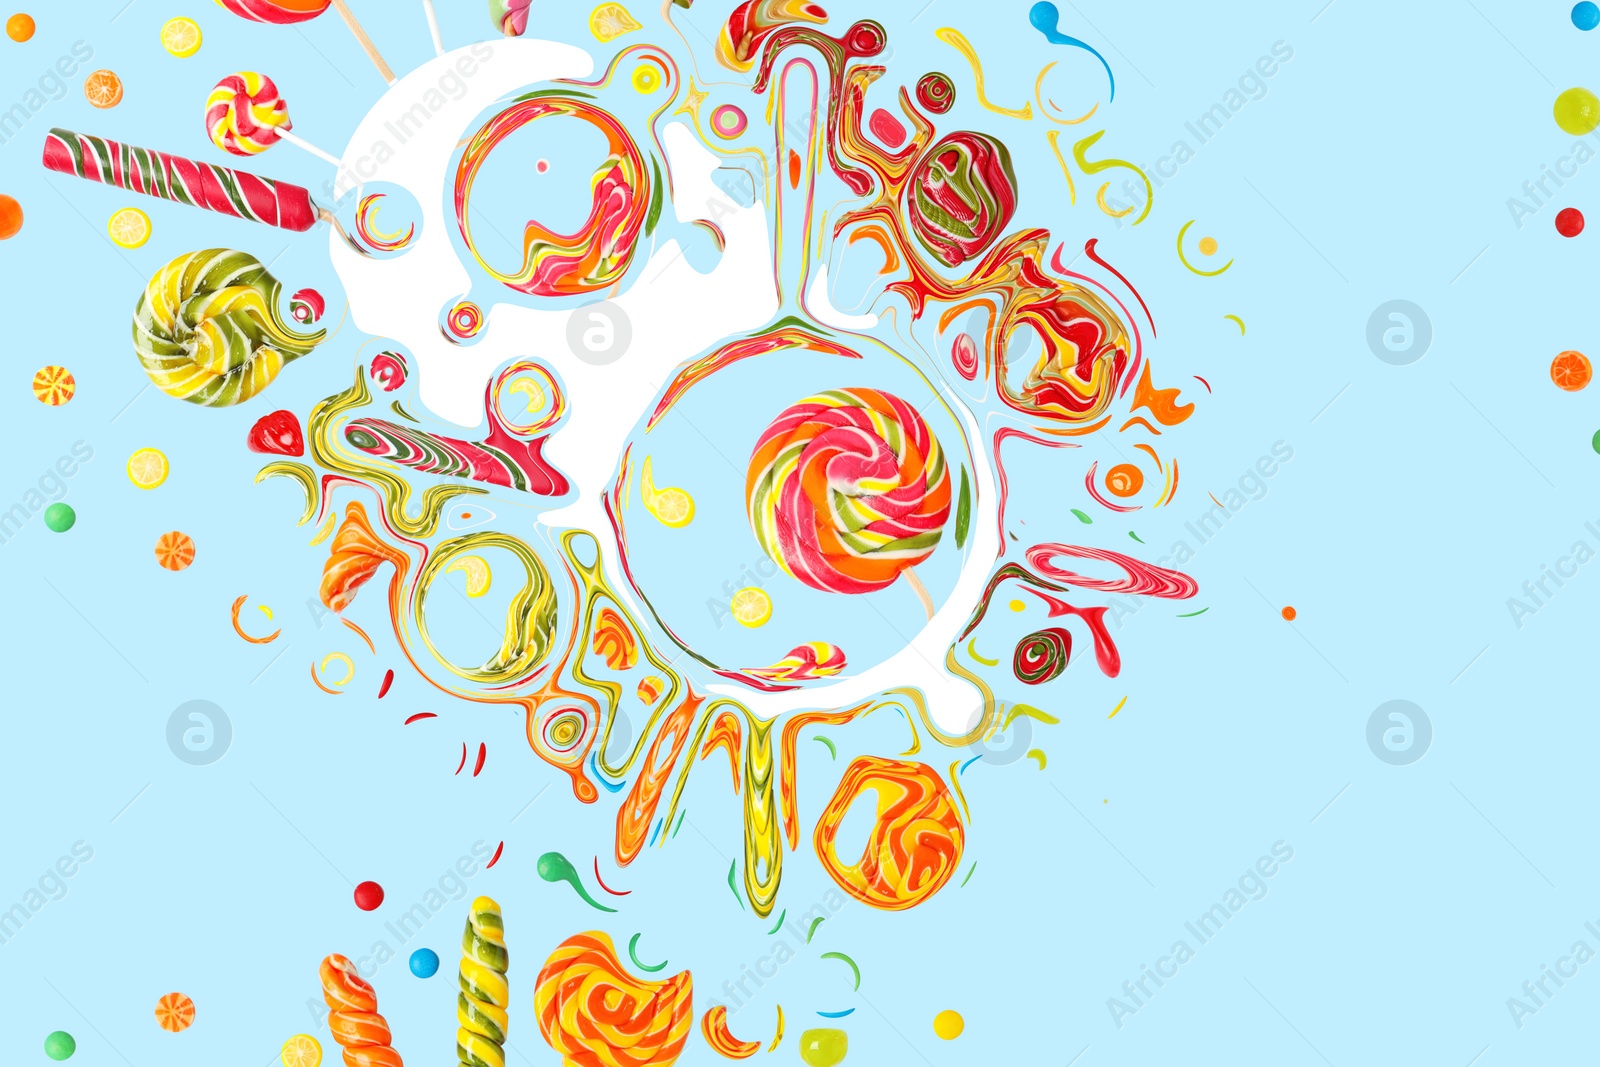 Image of Bright design with many different candies on pale light blue background